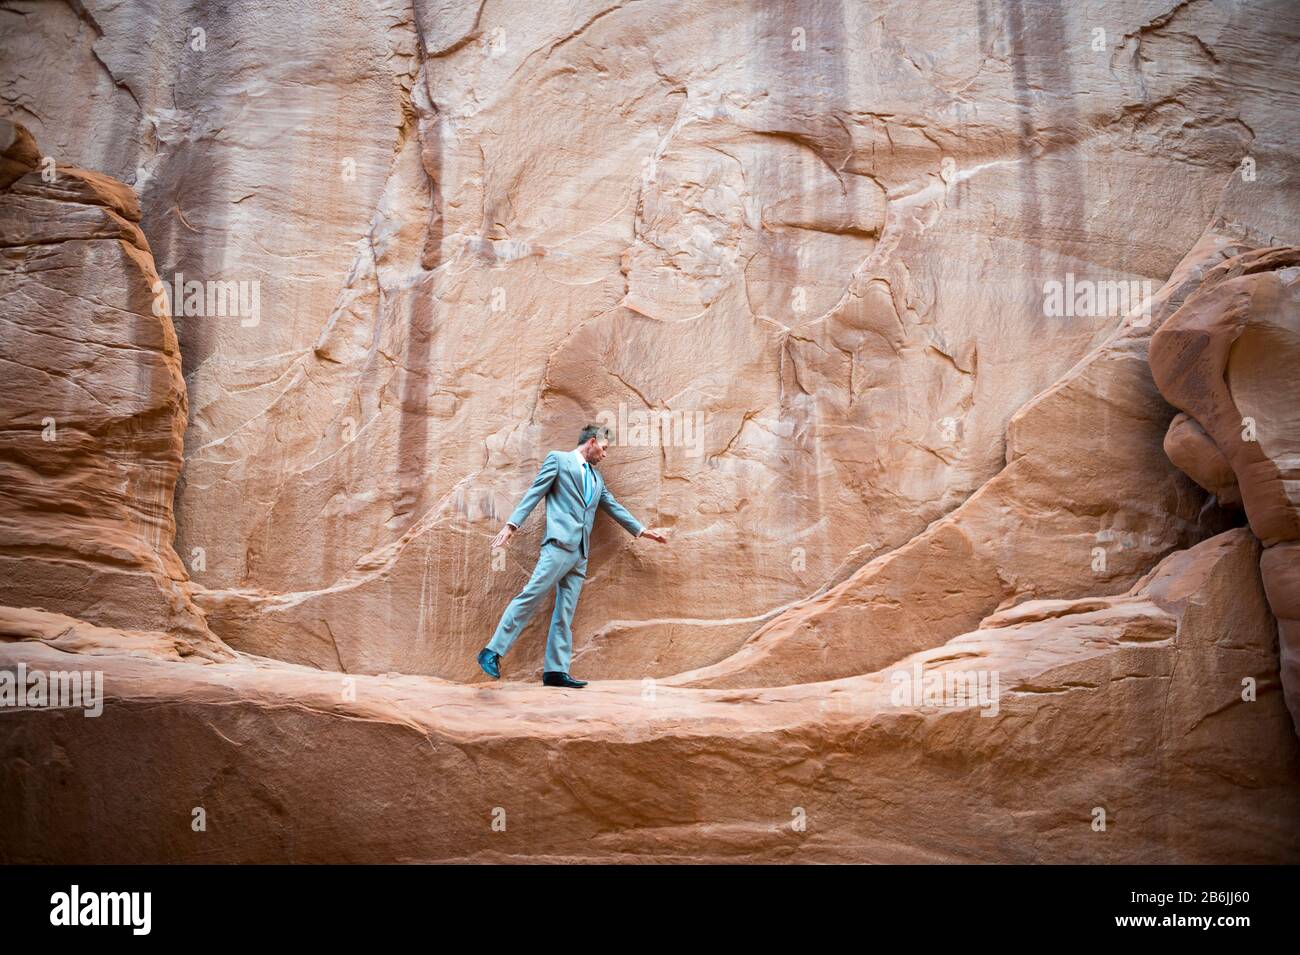 Nervous businessman taking a tentative step on a narrow ledge in a red rock canyon Stock Photo